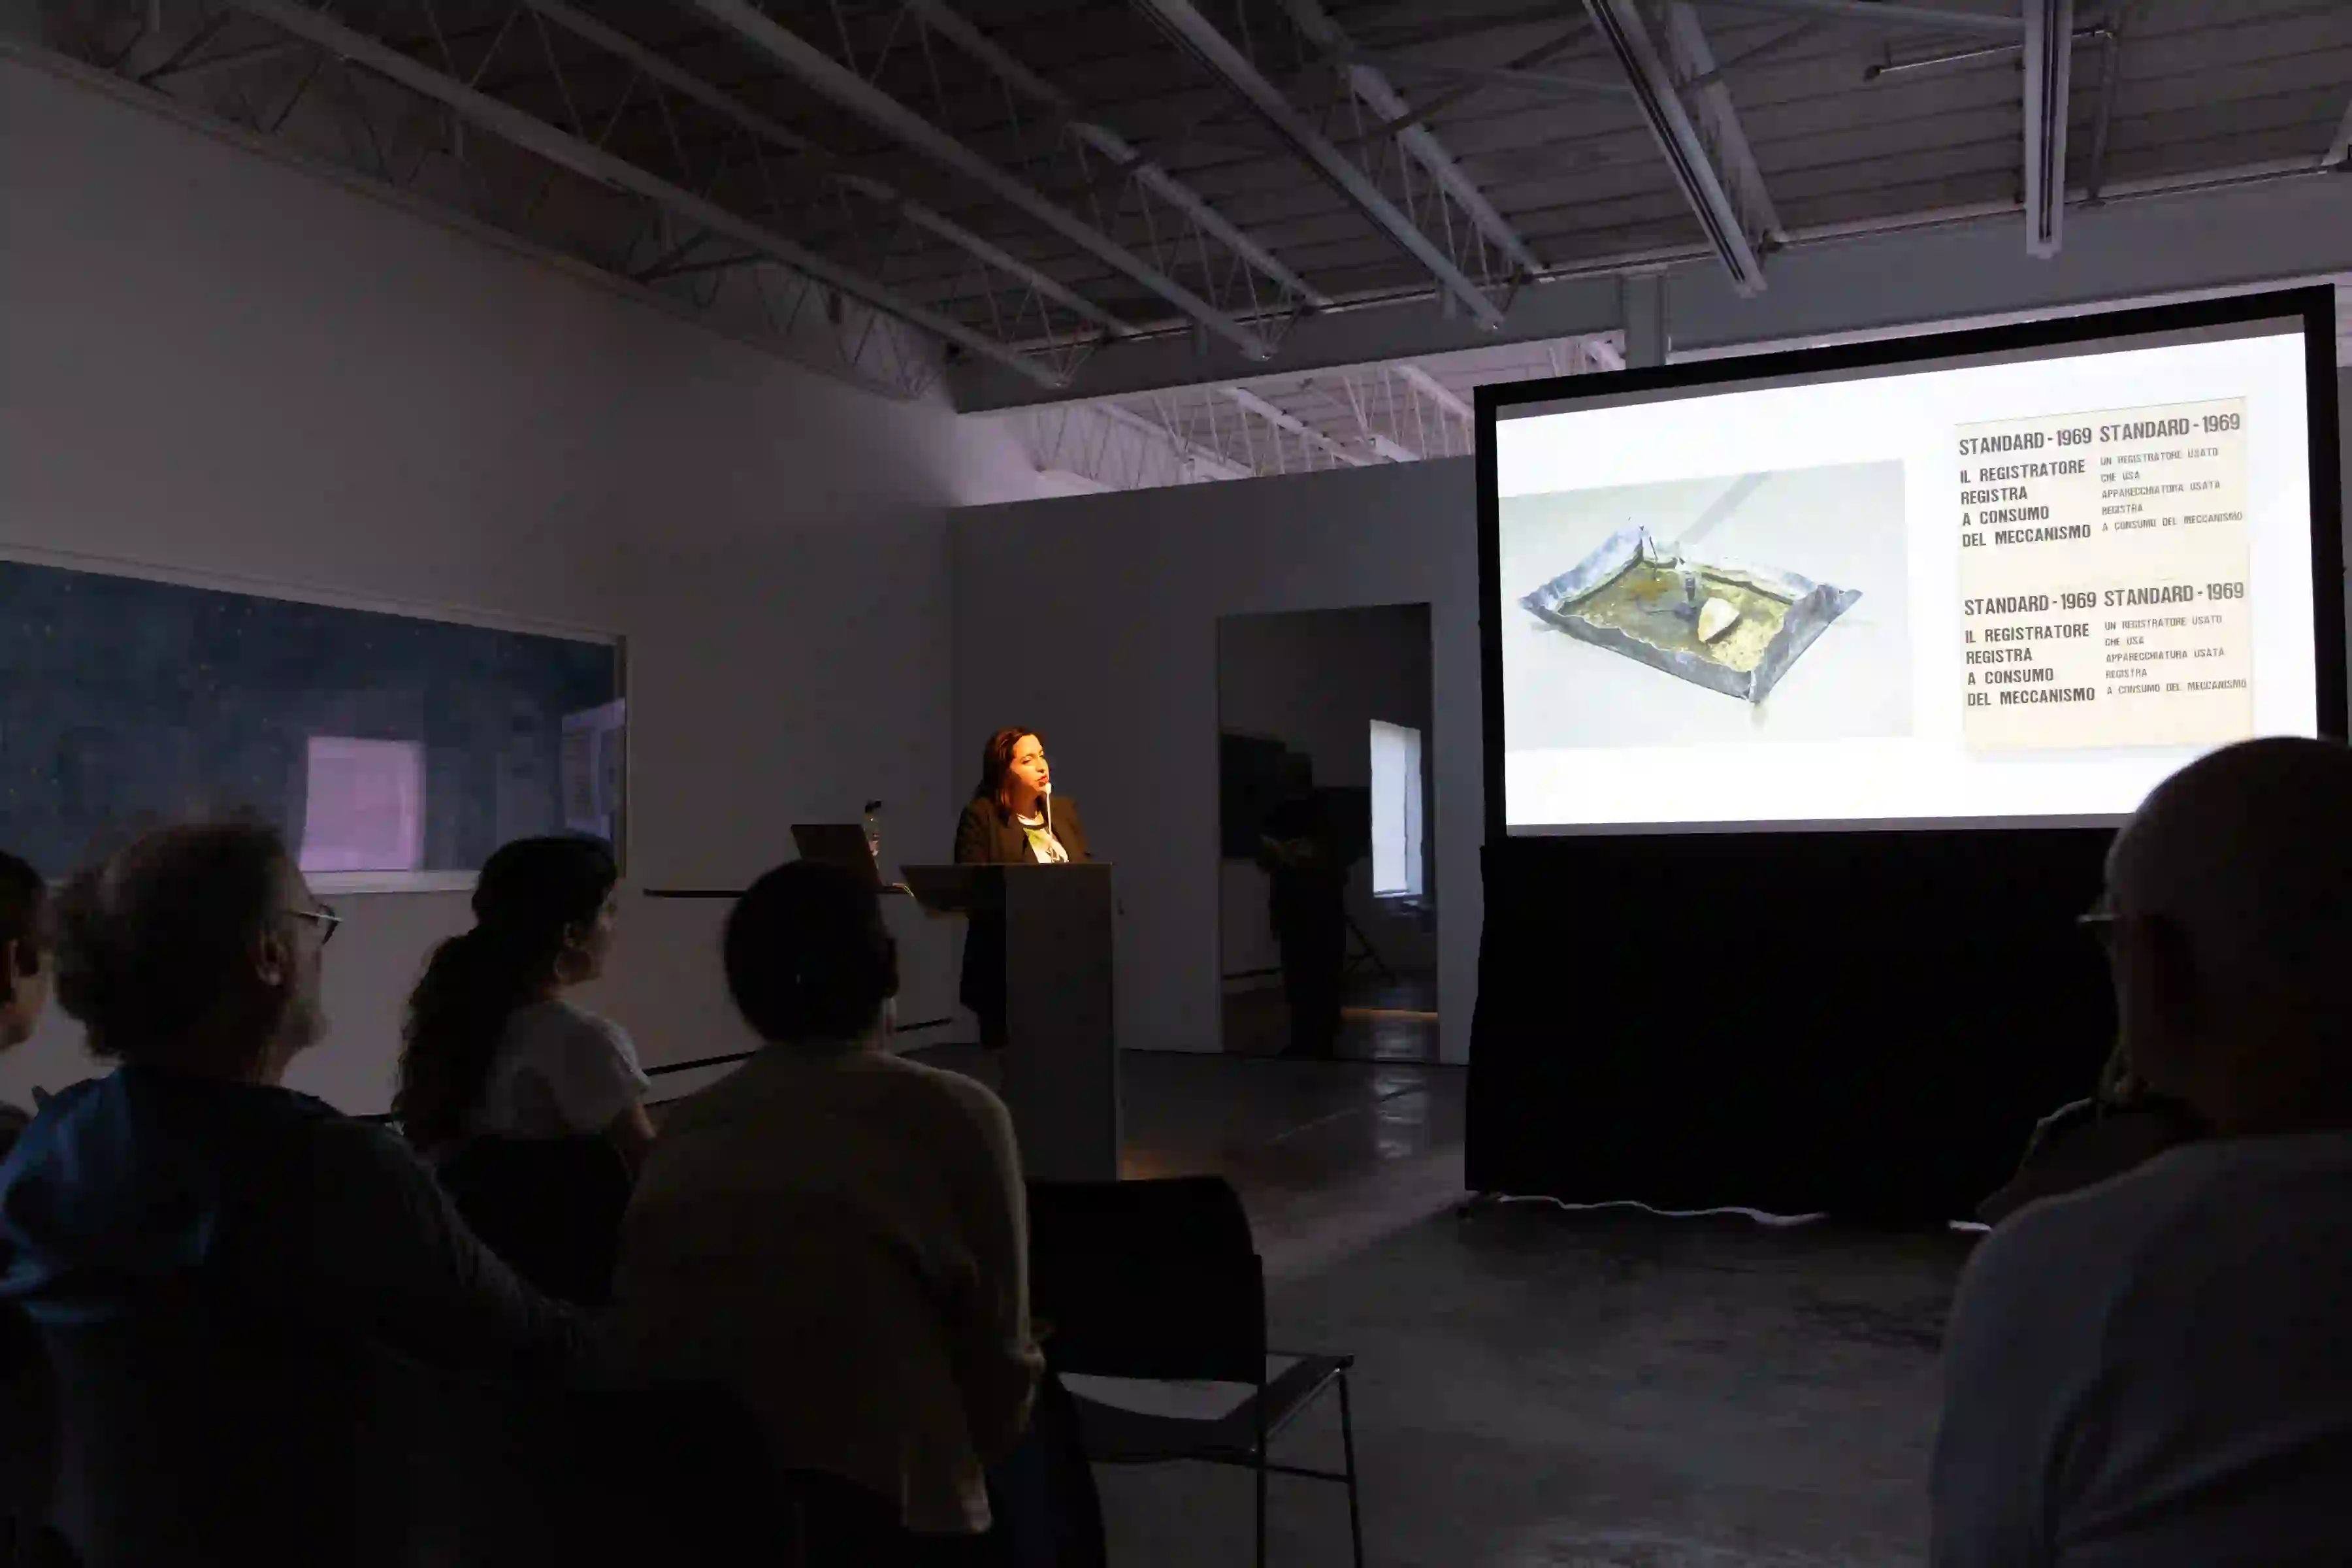 Photo of John Alchin and Hal Marryatt Associate Curator of Contemporary Art, Philadelphia Museum of Art, Erica F. Battle, giving her lecture "Recasting the Past: Amalfi ’68 and the Spaces between Exhibition and History," on June 15, 2019